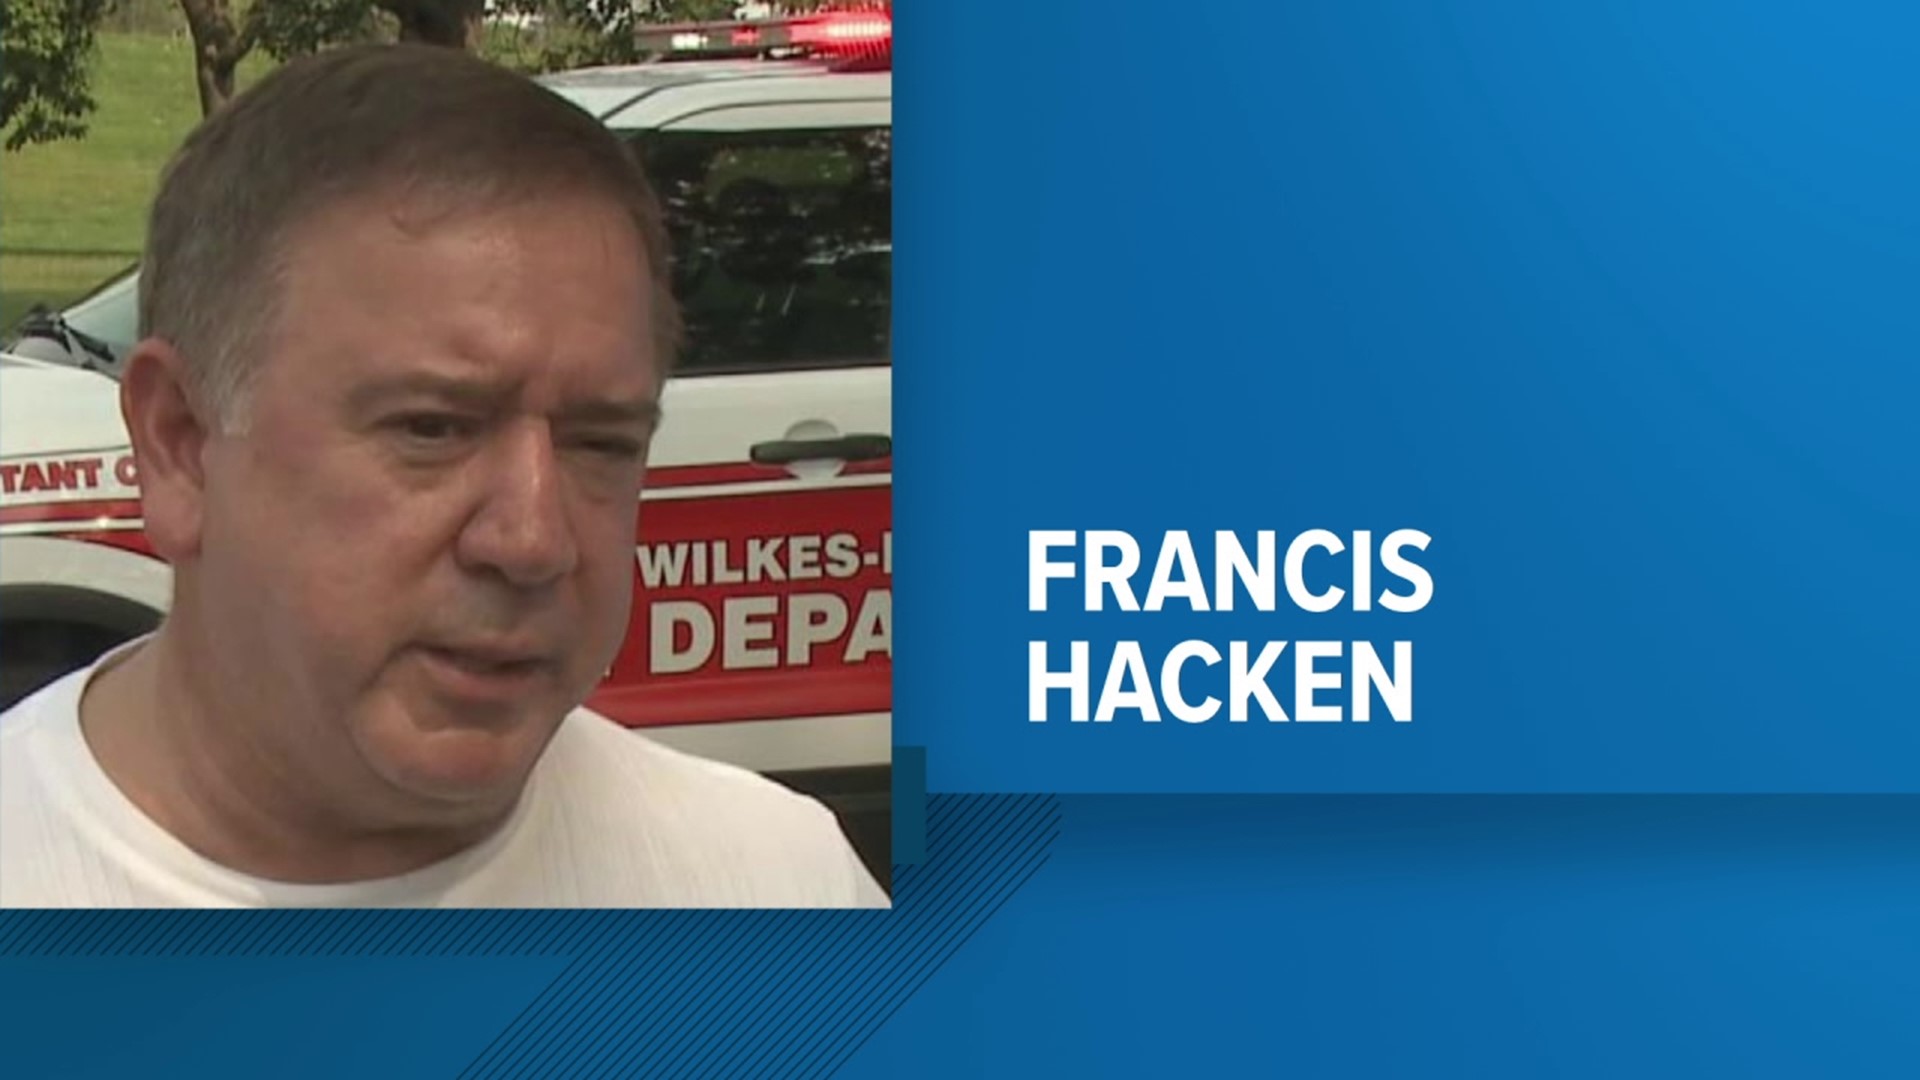 Francis Hacken announced his resignation in a statement Friday.